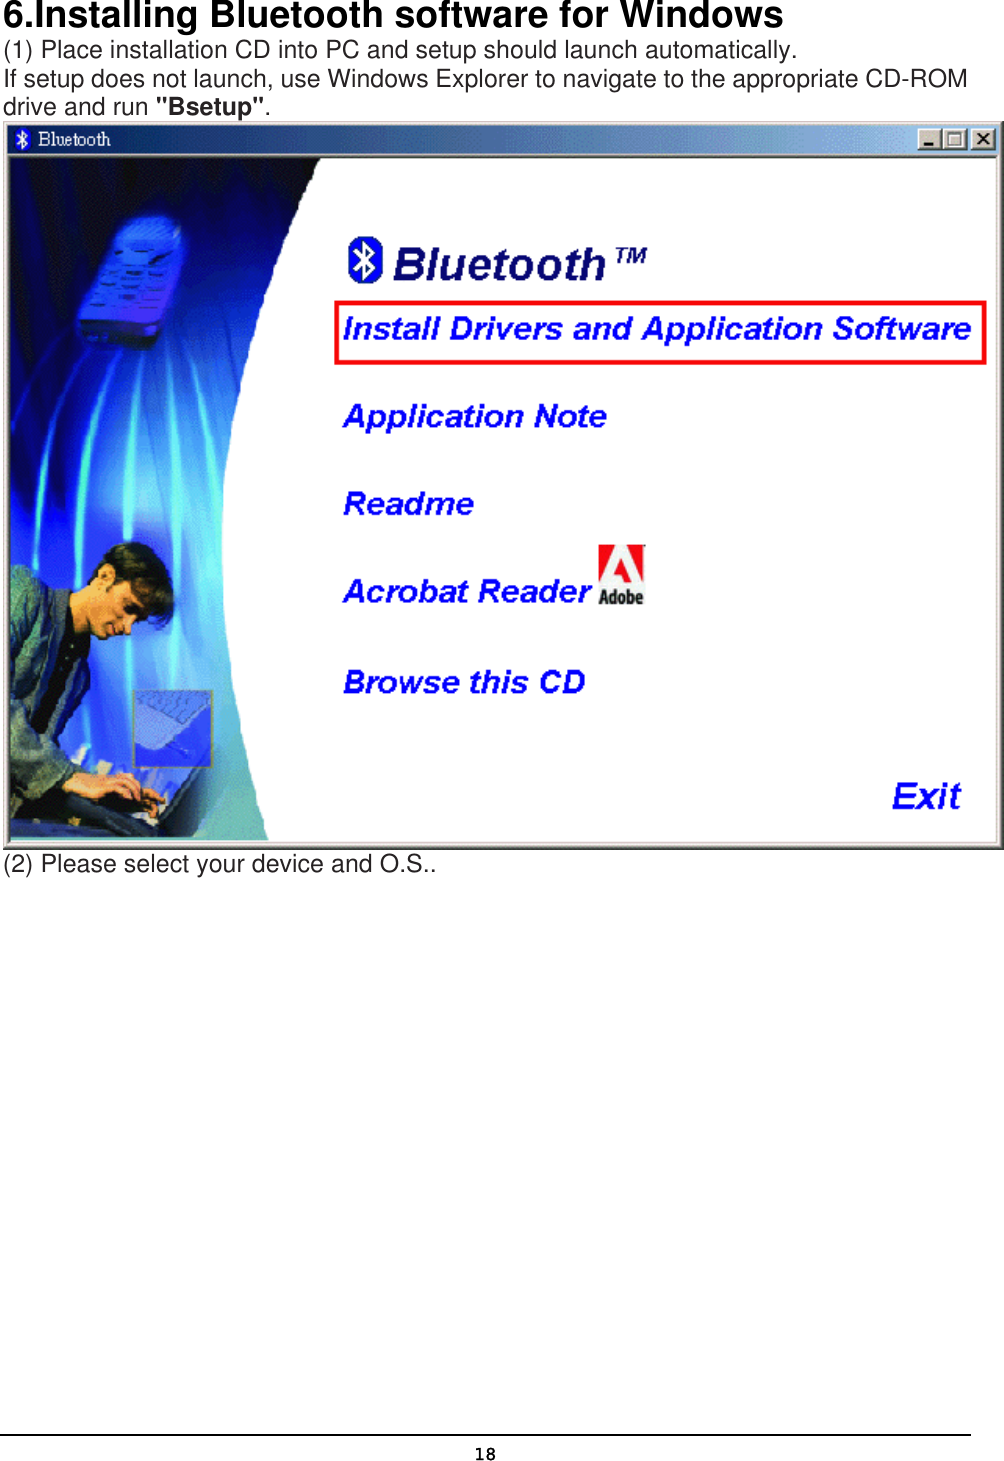   186.Installing Bluetooth software for Windows (1) Place installation CD into PC and setup should launch automatically.  If setup does not launch, use Windows Explorer to navigate to the appropriate CD-ROM drive and run &quot;Bsetup&quot;.  (2) Please select your device and O.S.. 